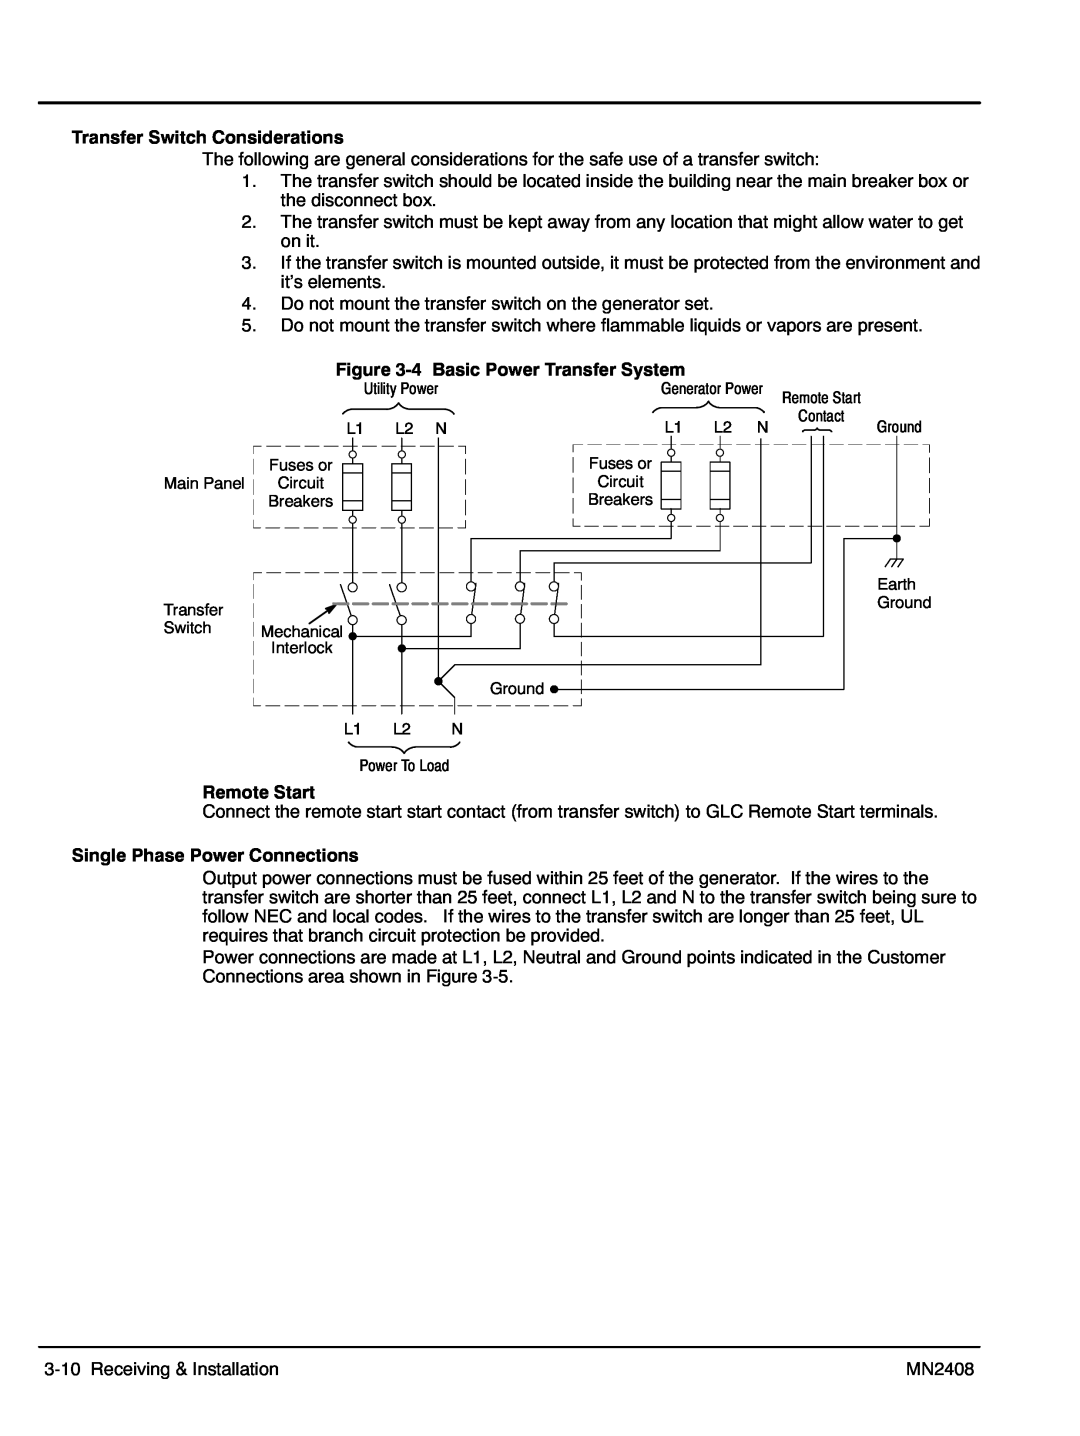 Baldor GLC60 Transfer Switch Considerations, ‐4 Basic Power Transfer System, Remote Start, Single Phase Power Connections 